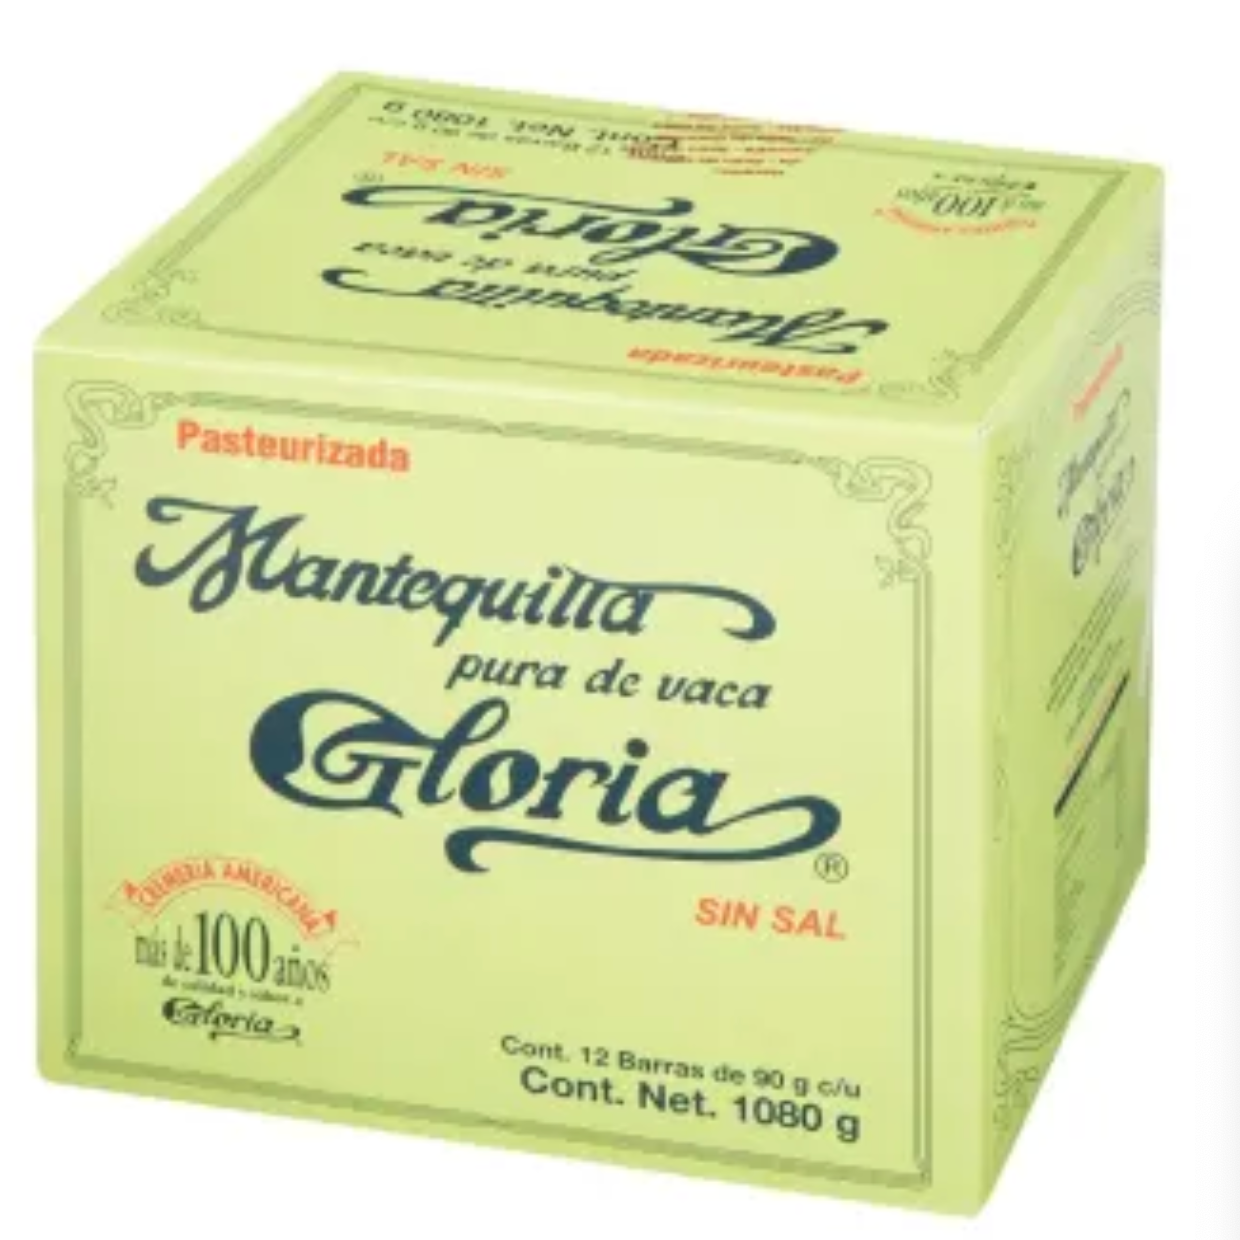 Gloria mantequilla sin sal (pack 12 x 90 g), Delivery Near You